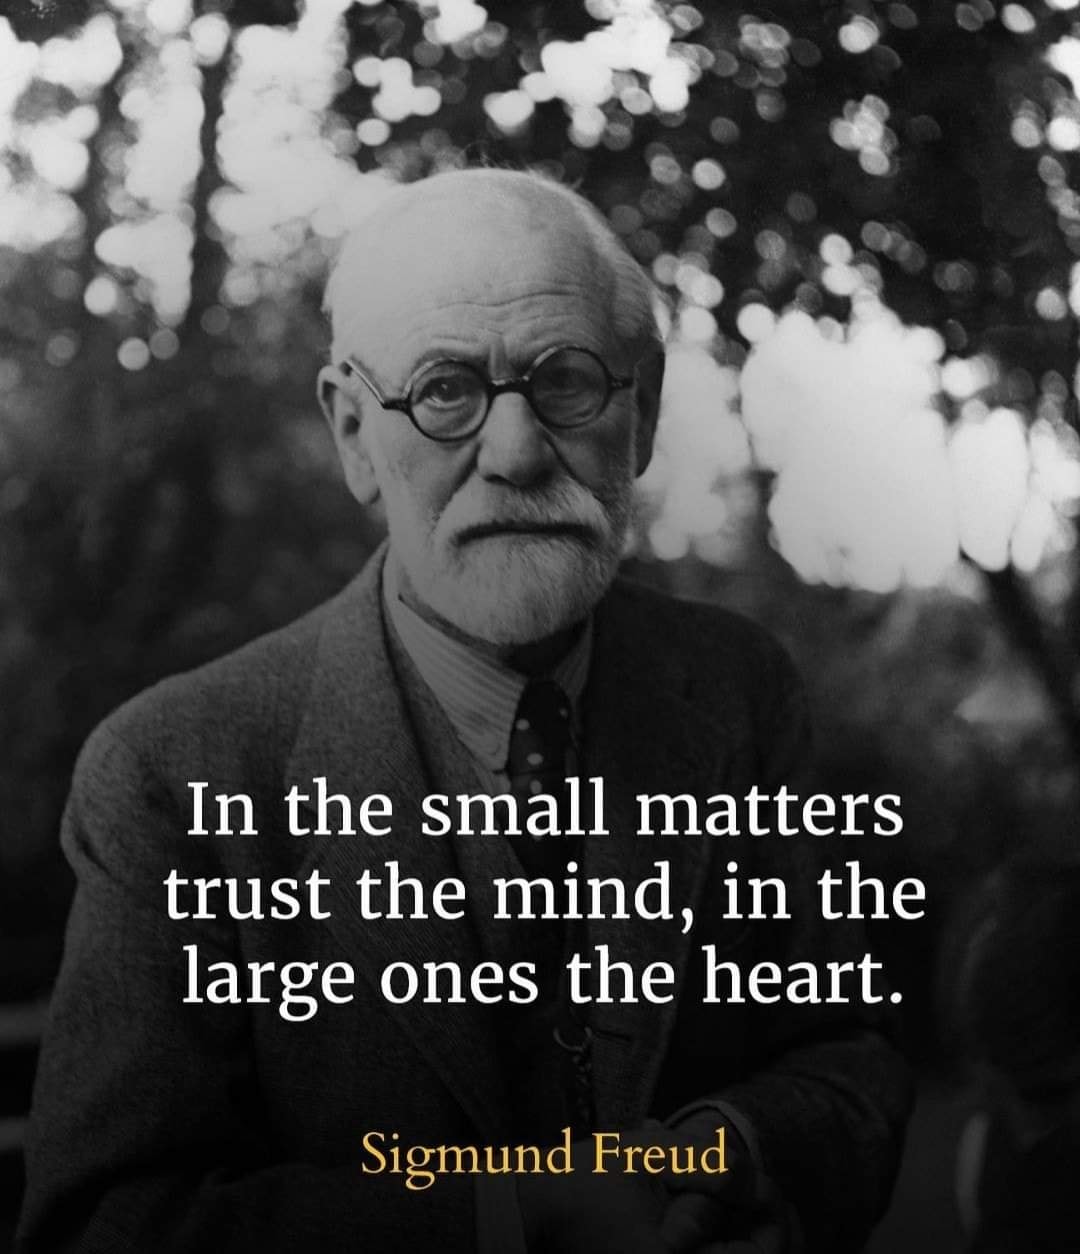  In the small matters trust the mind, in the large ones the heart. Sigmund Freud